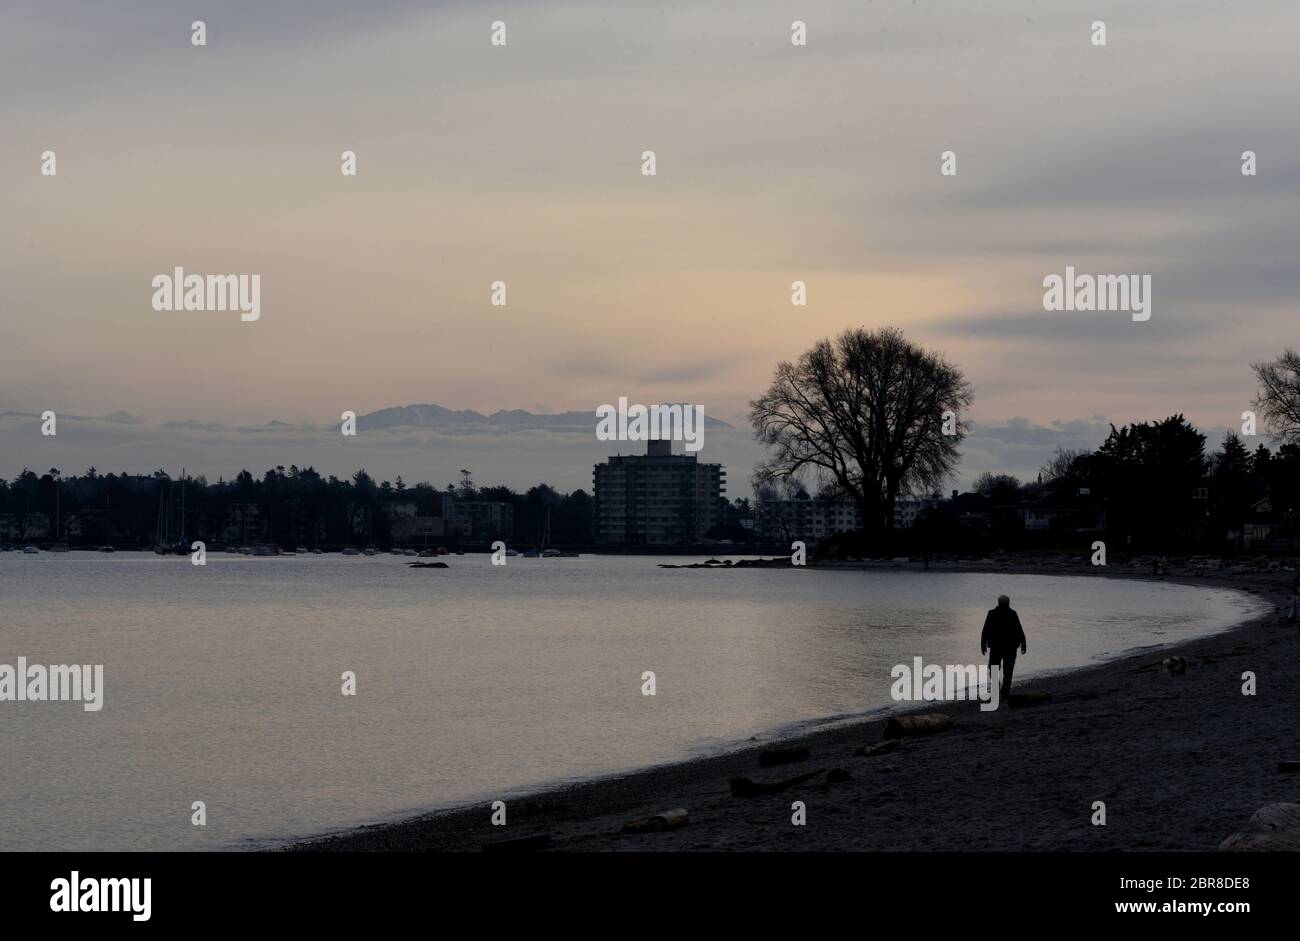 A man is silhouetted as he walks along the shore of Willows Beach in Oak Bay on Vancouver Island, British Columbia, Canada Stock Photo